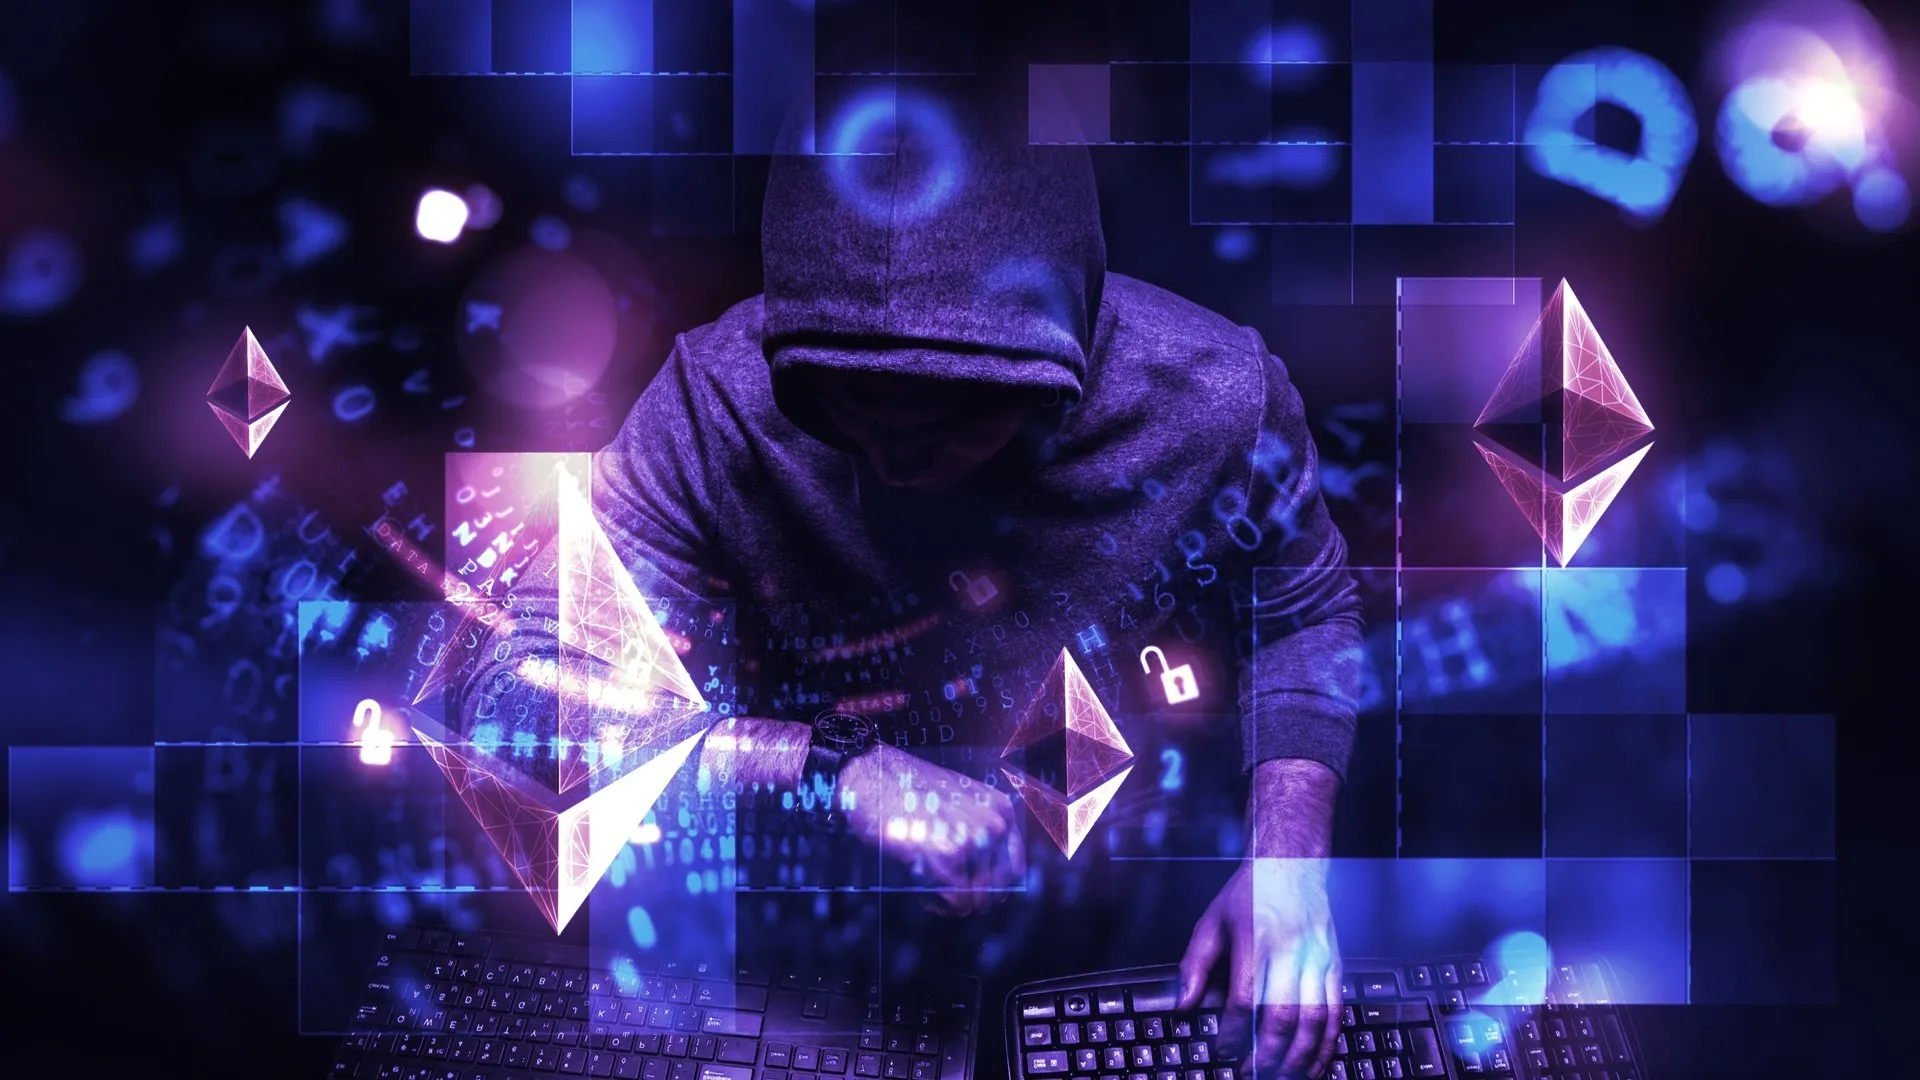 Scammers and hackers are a huge problem in the industry. Image: Shutterstock